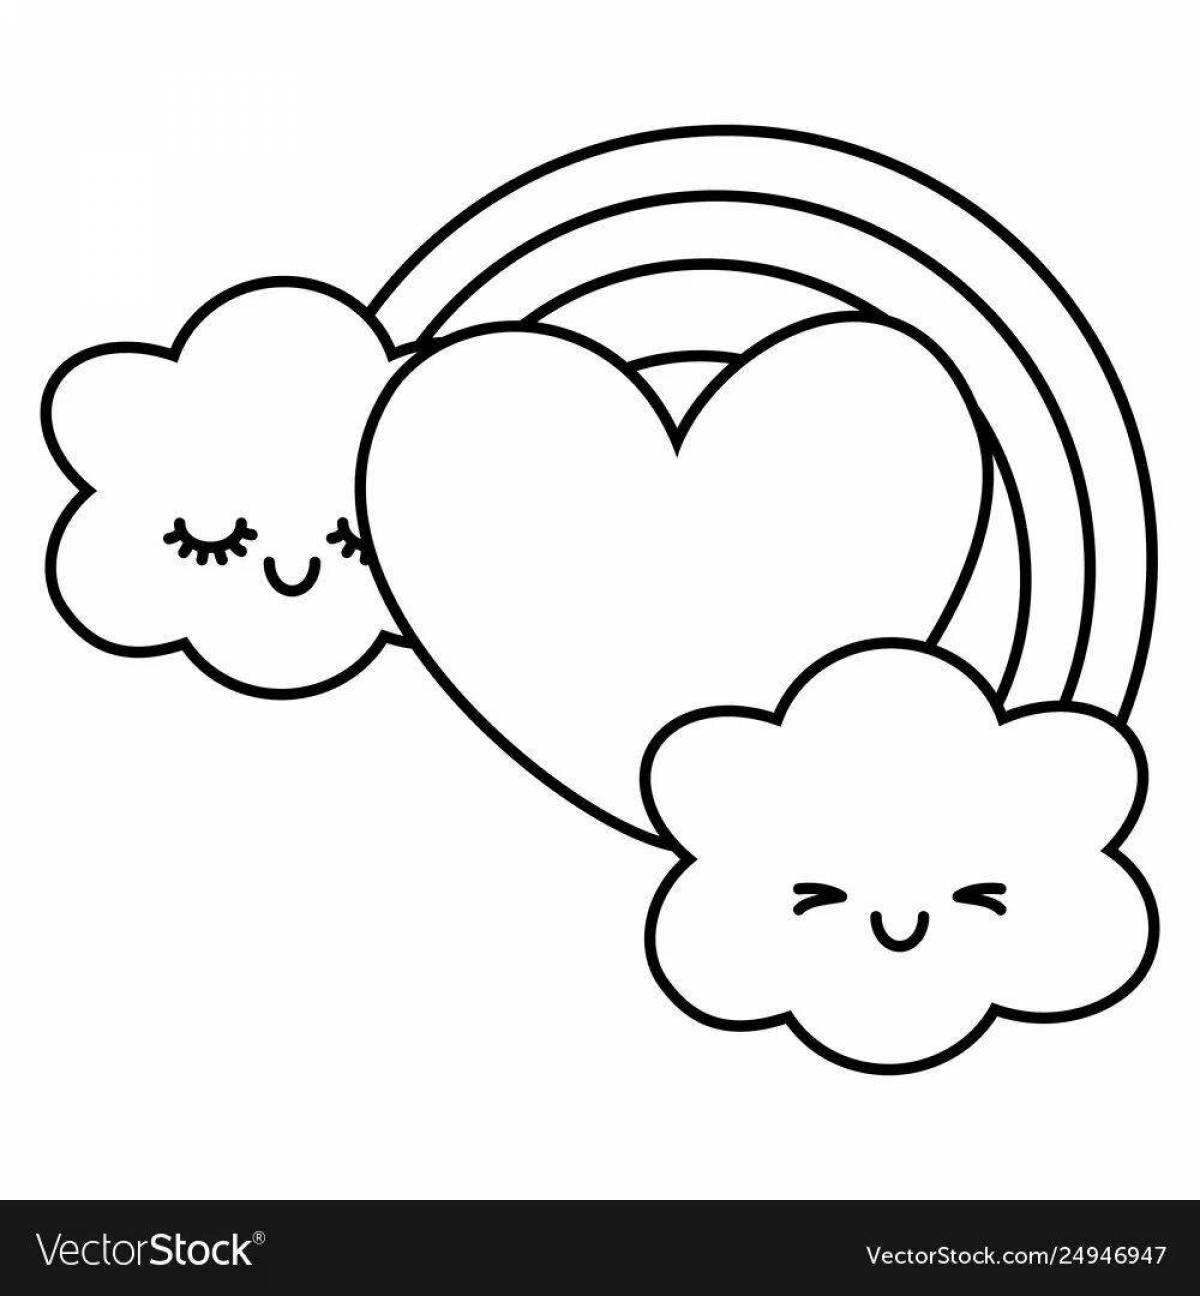 Glitter rainbow heart coloring page